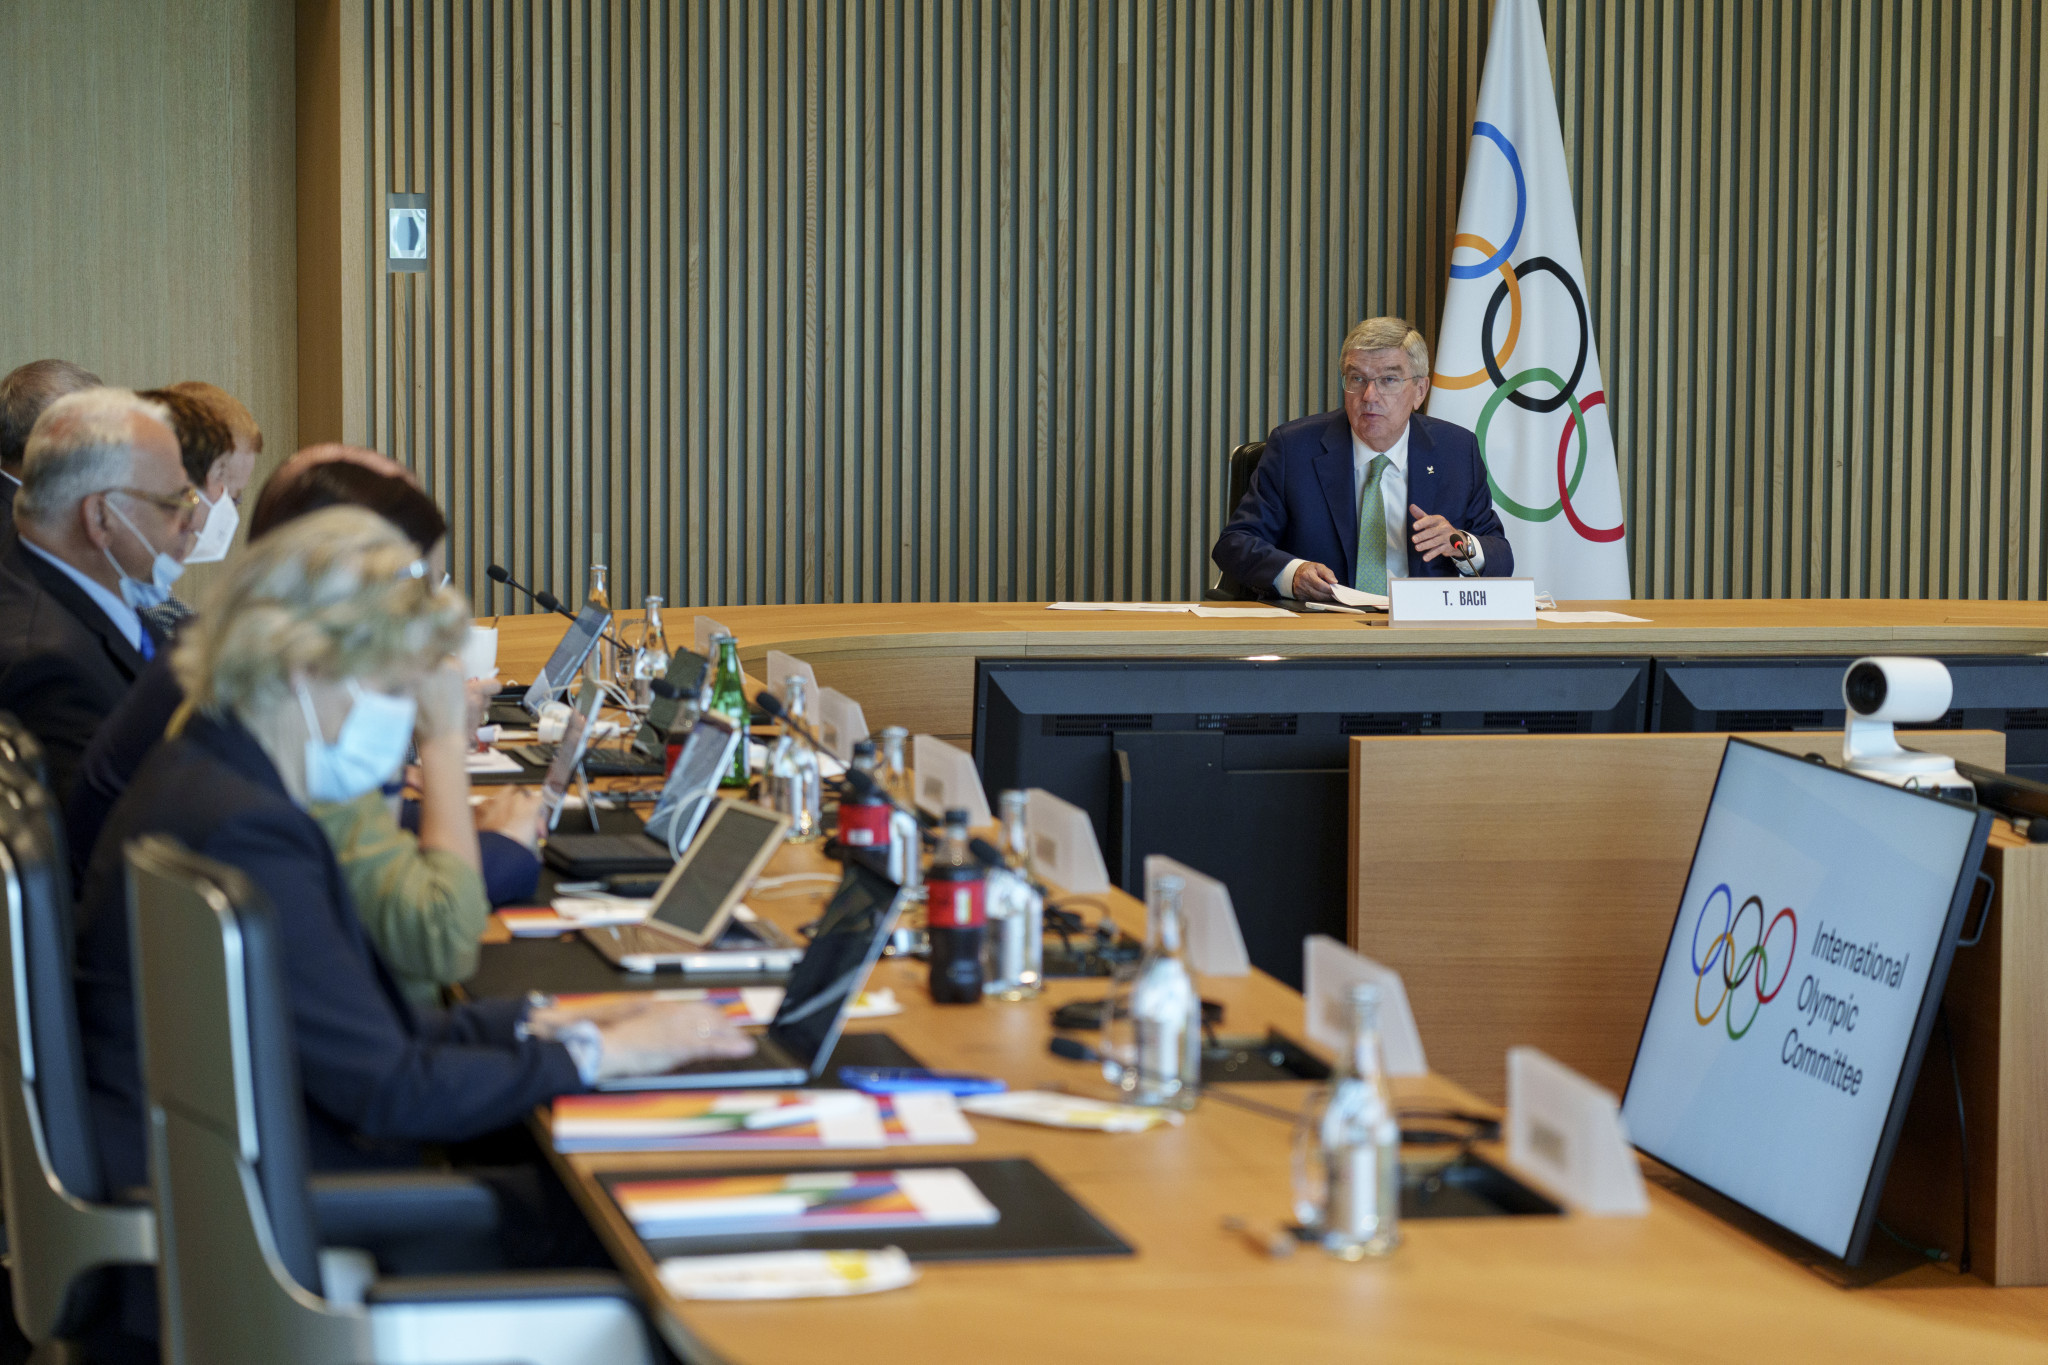 Key issues including IBA status set to be discussed by IOC Executive Board